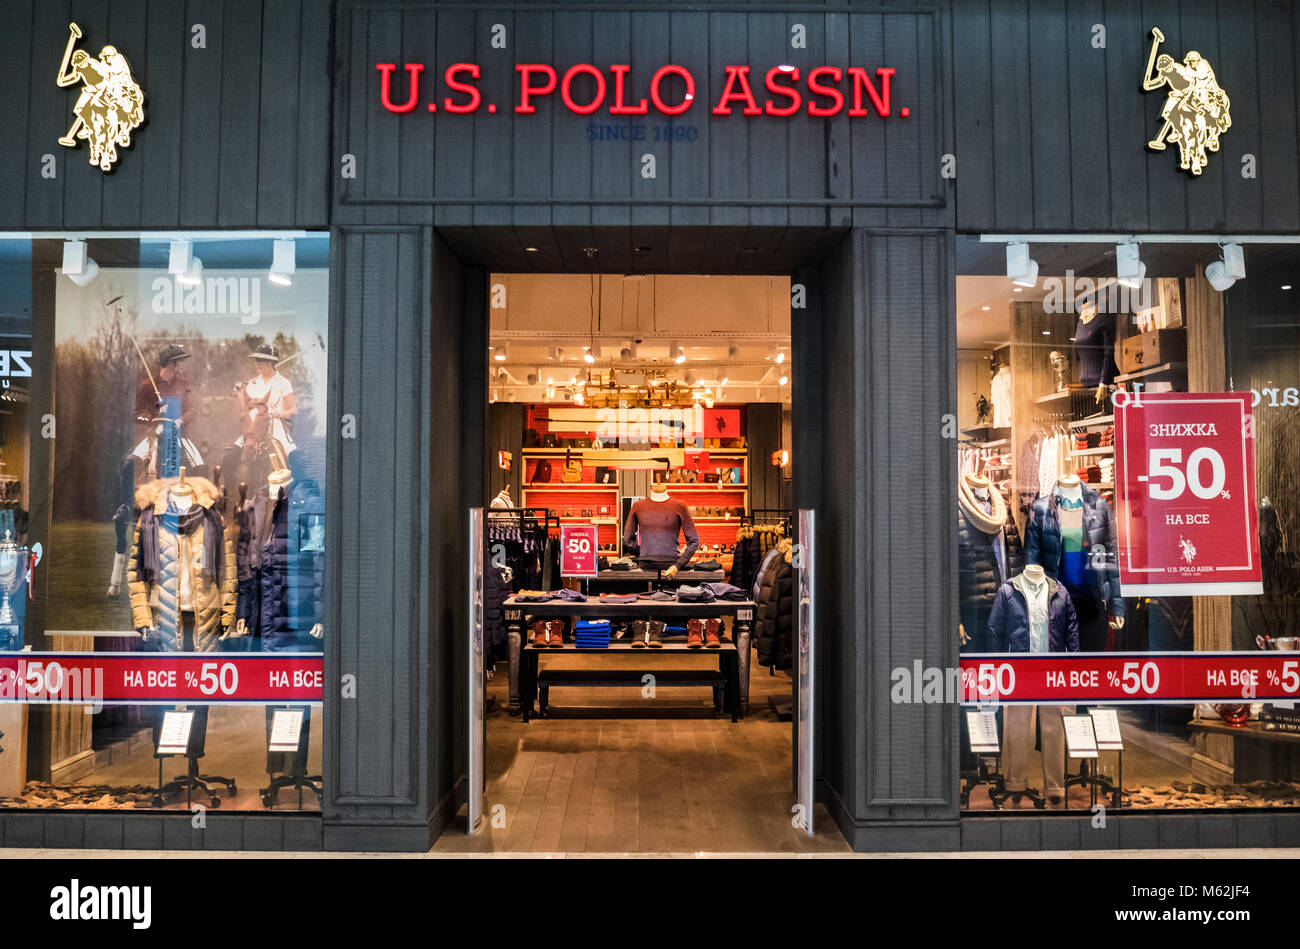 knal Onrecht profiel Us Polo Assn High Resolution Stock Photography and Images - Alamy